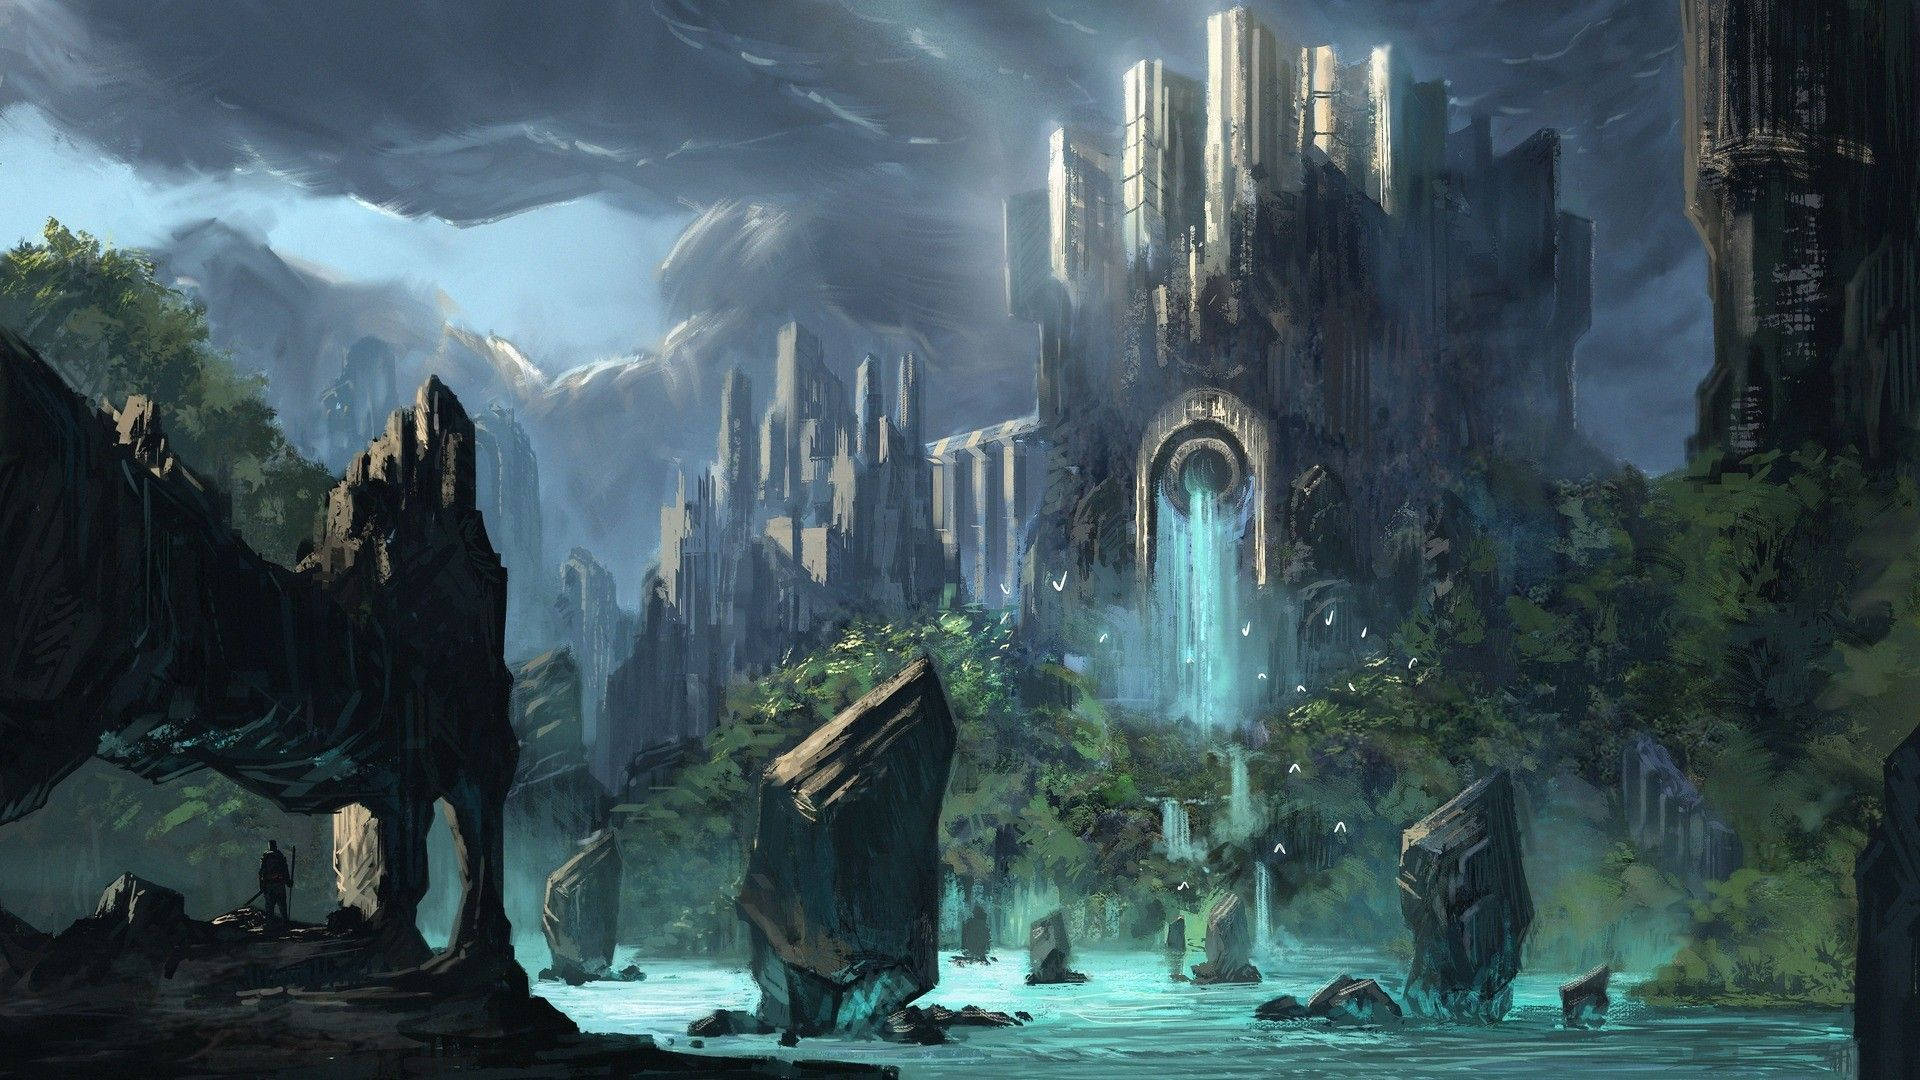 Embark on an Adventure to the Ancient Fantasy Kingdom Wallpaper